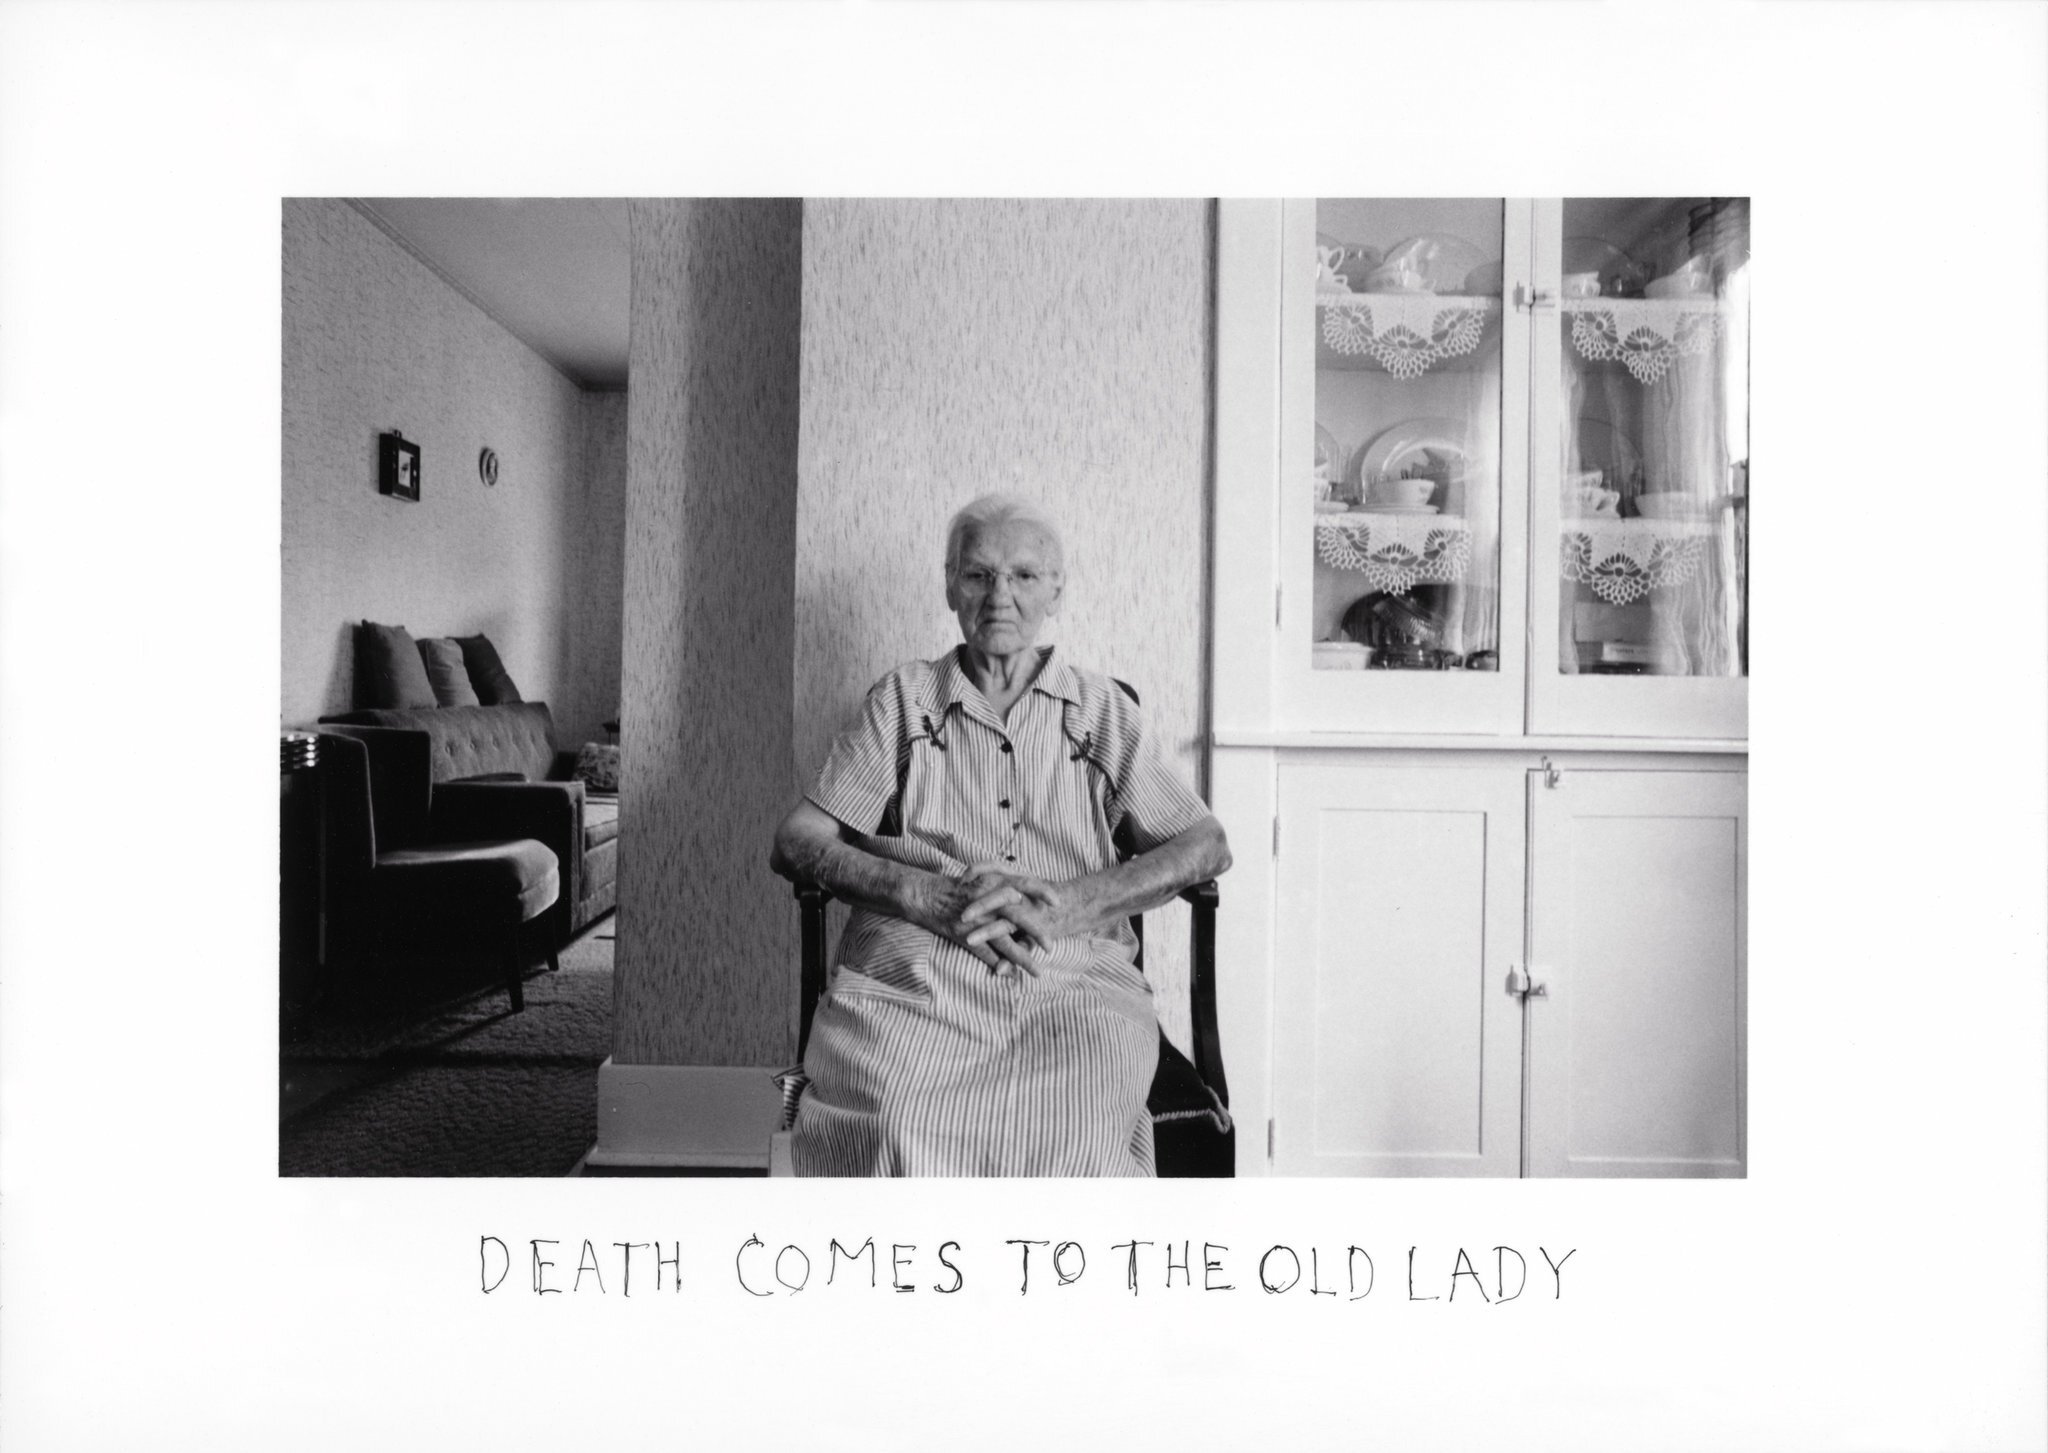 From the series, “Death Comes to the Old Lady”, 1969.